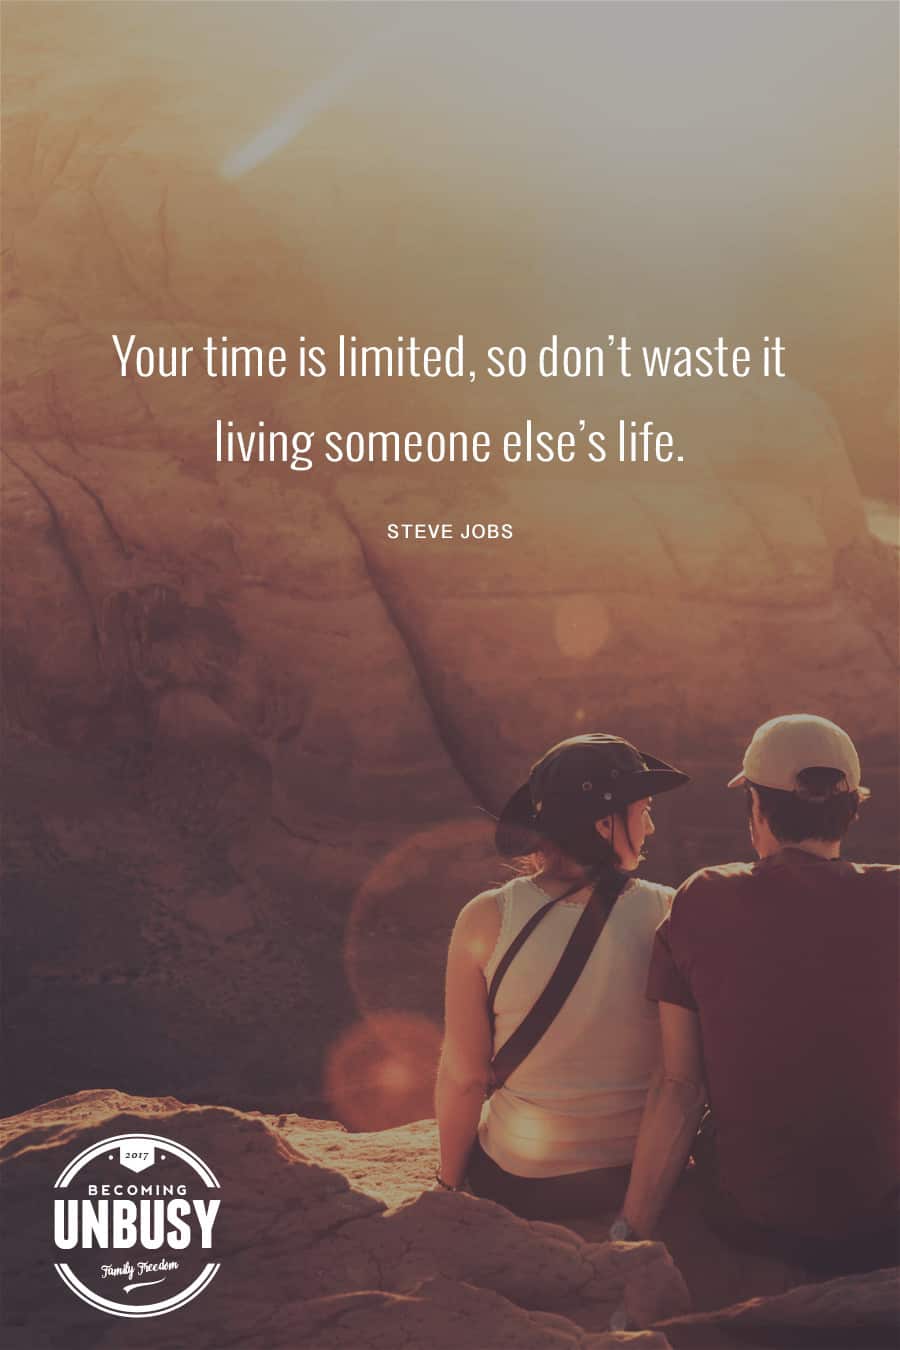 10 Good Morning Quotes - Your time is limited, so don't waste it living someone else's life. #lifequotes #quotes #goodmorningquotes #coffeequotes *Start the day off right with these morning inspirational quotes. Love this good morning motivation!